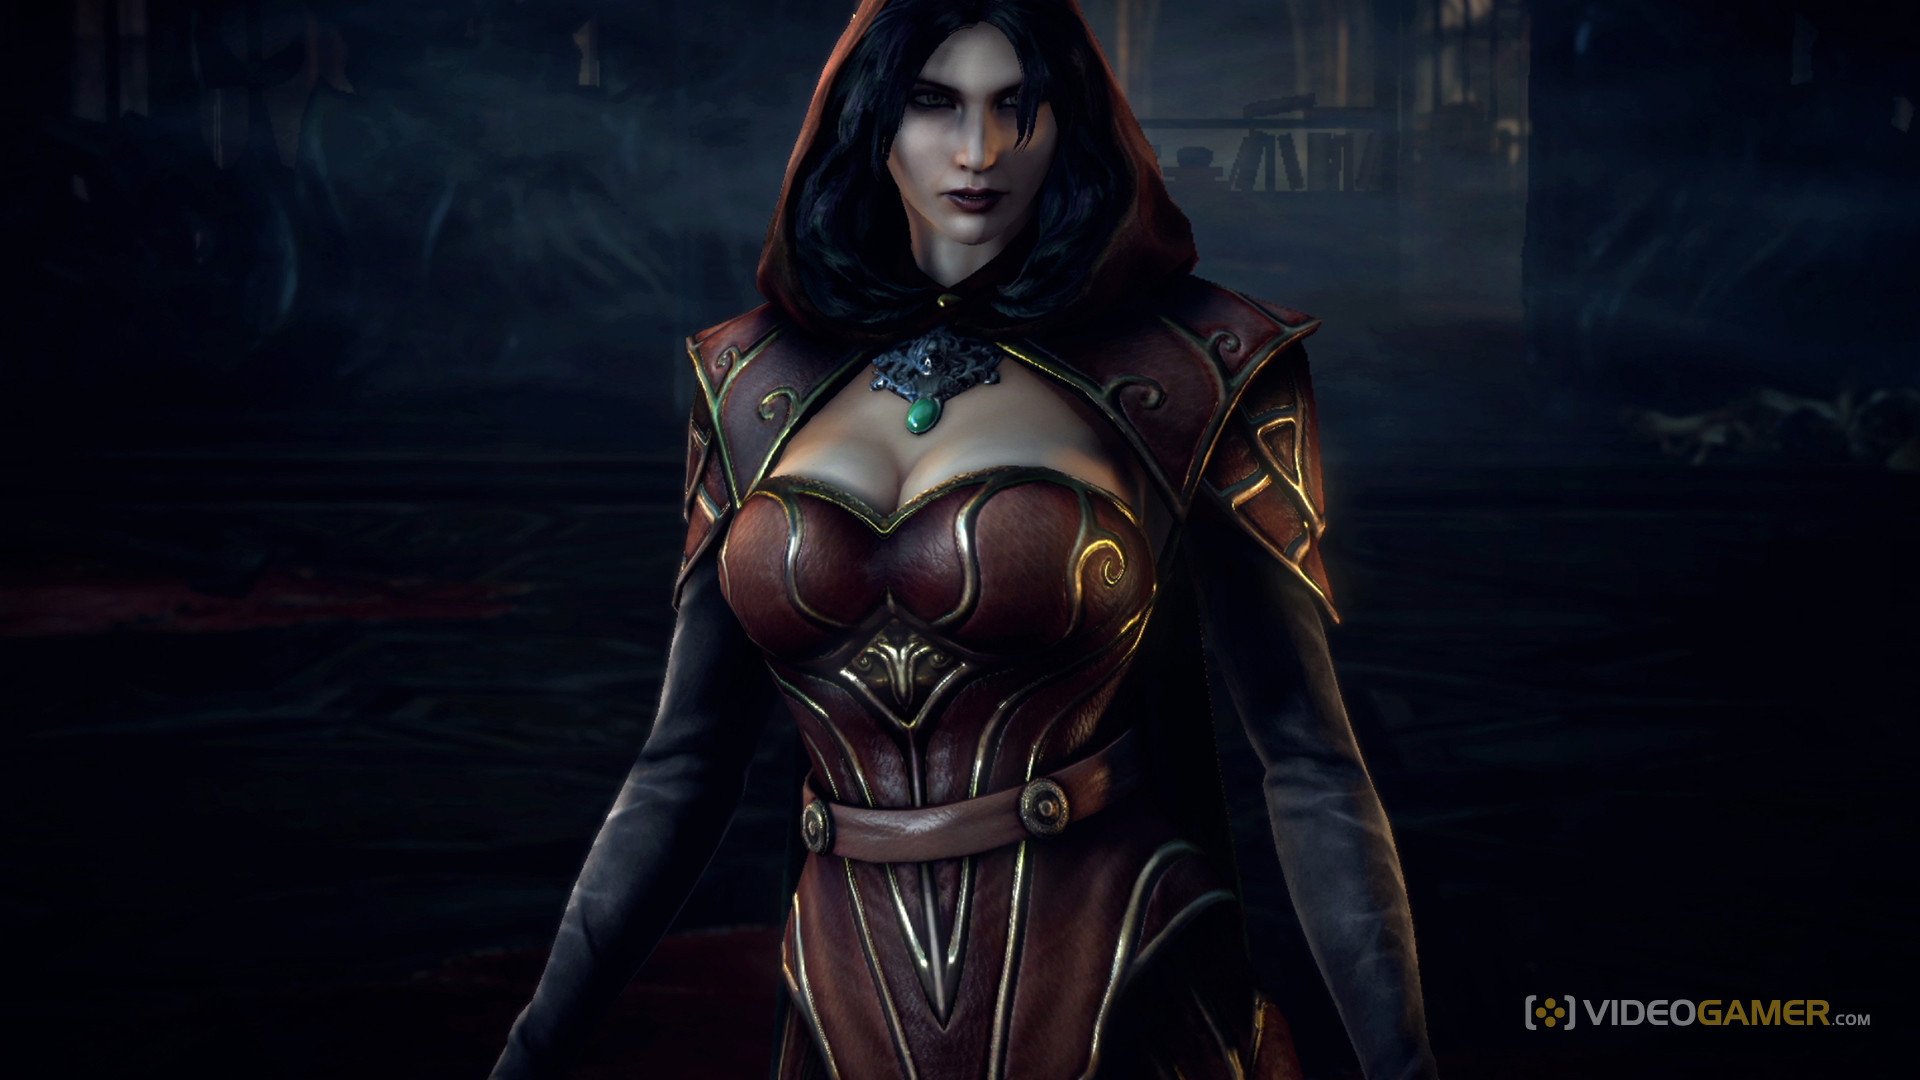 Castlevania Lords Of Shadow 2 HD Wallpaper